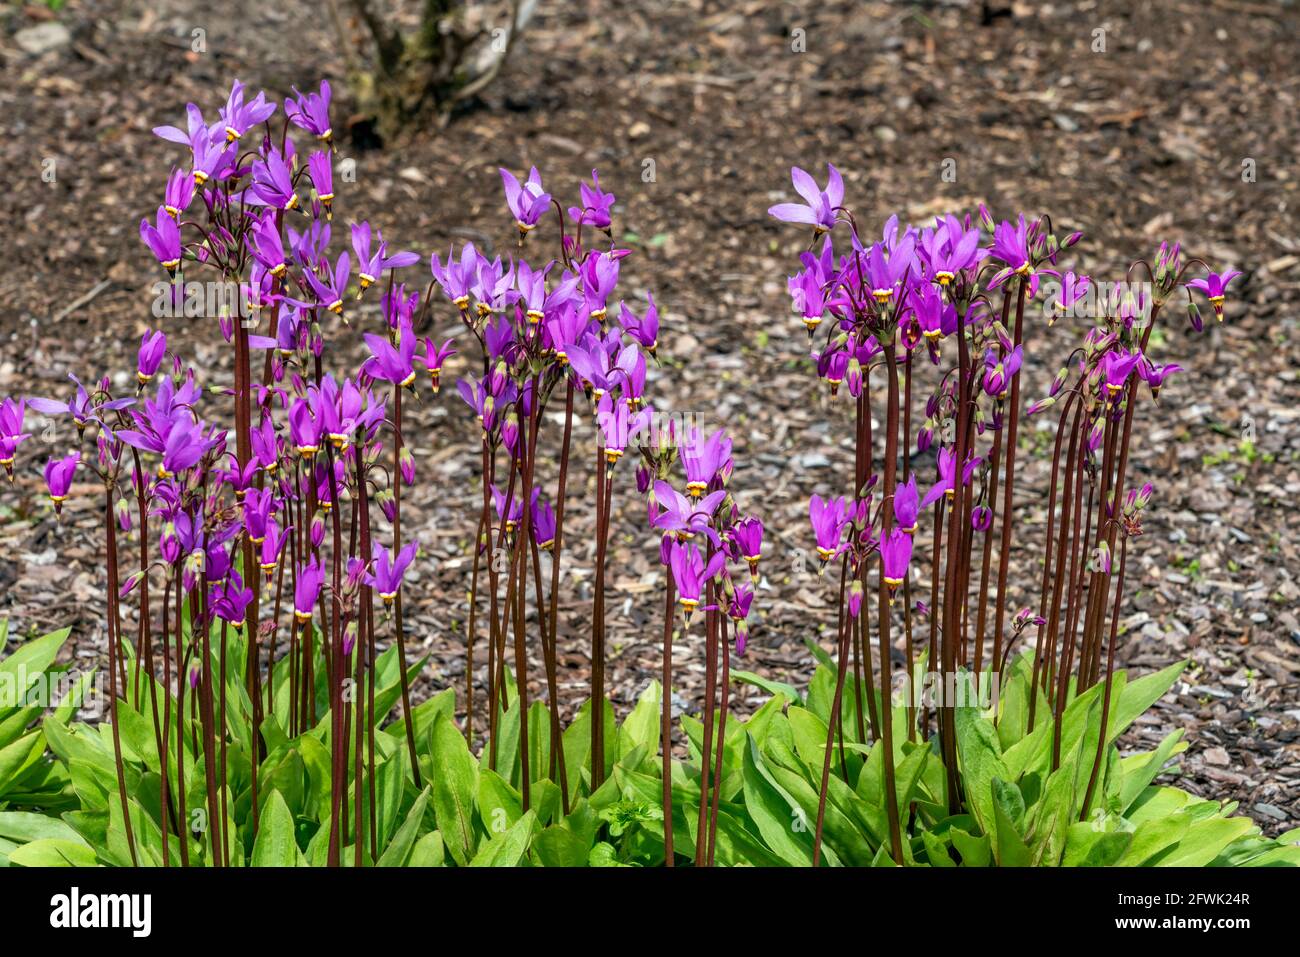 Dodecatheon meadia a spring flowering plant with a pink springtime flower commonly known as shooting star or American cowslip, stock photo image Stock Photo